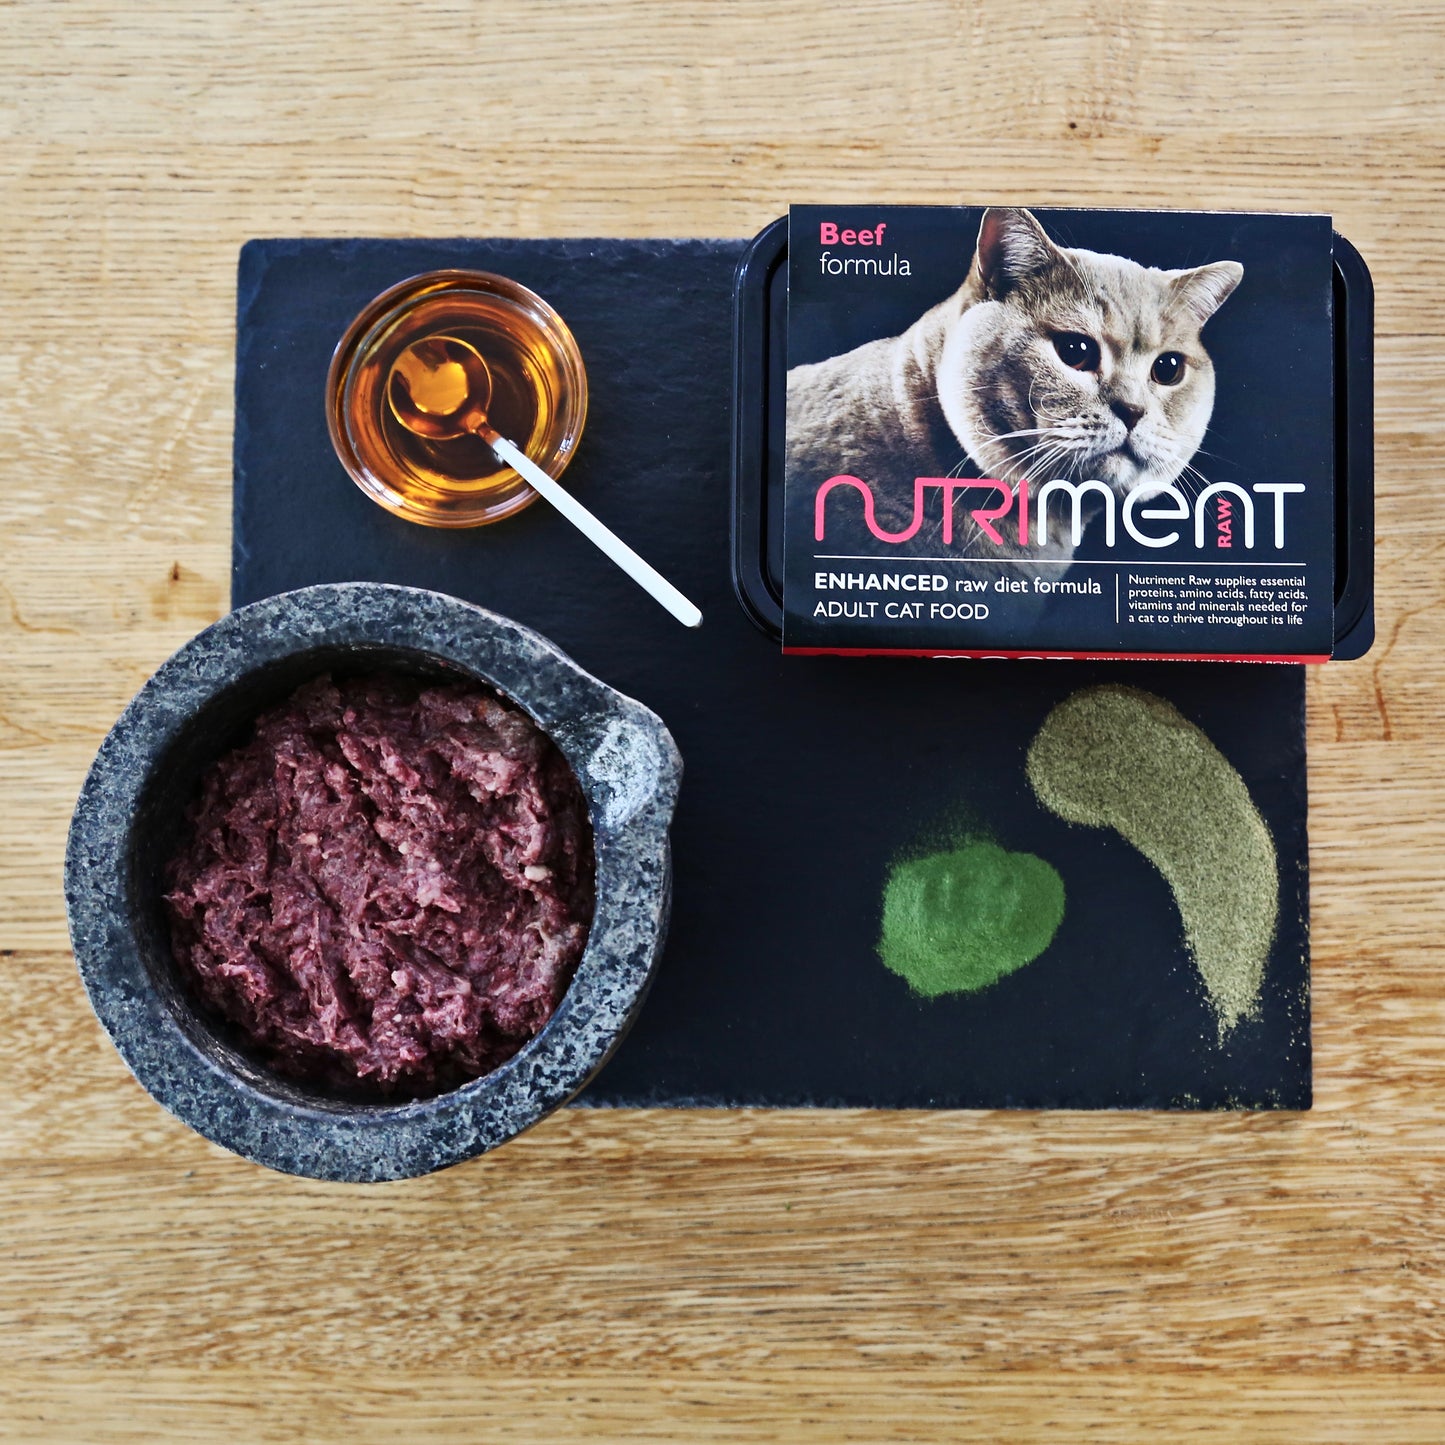 Nutriment beef cat raw food| chicken raw cat food| kingston cat food| raw cat food| healthy cat food| grain free cat food| cat food delivered| frozen cat food| quality raw food| cat food New Malden| cat food surbiton|